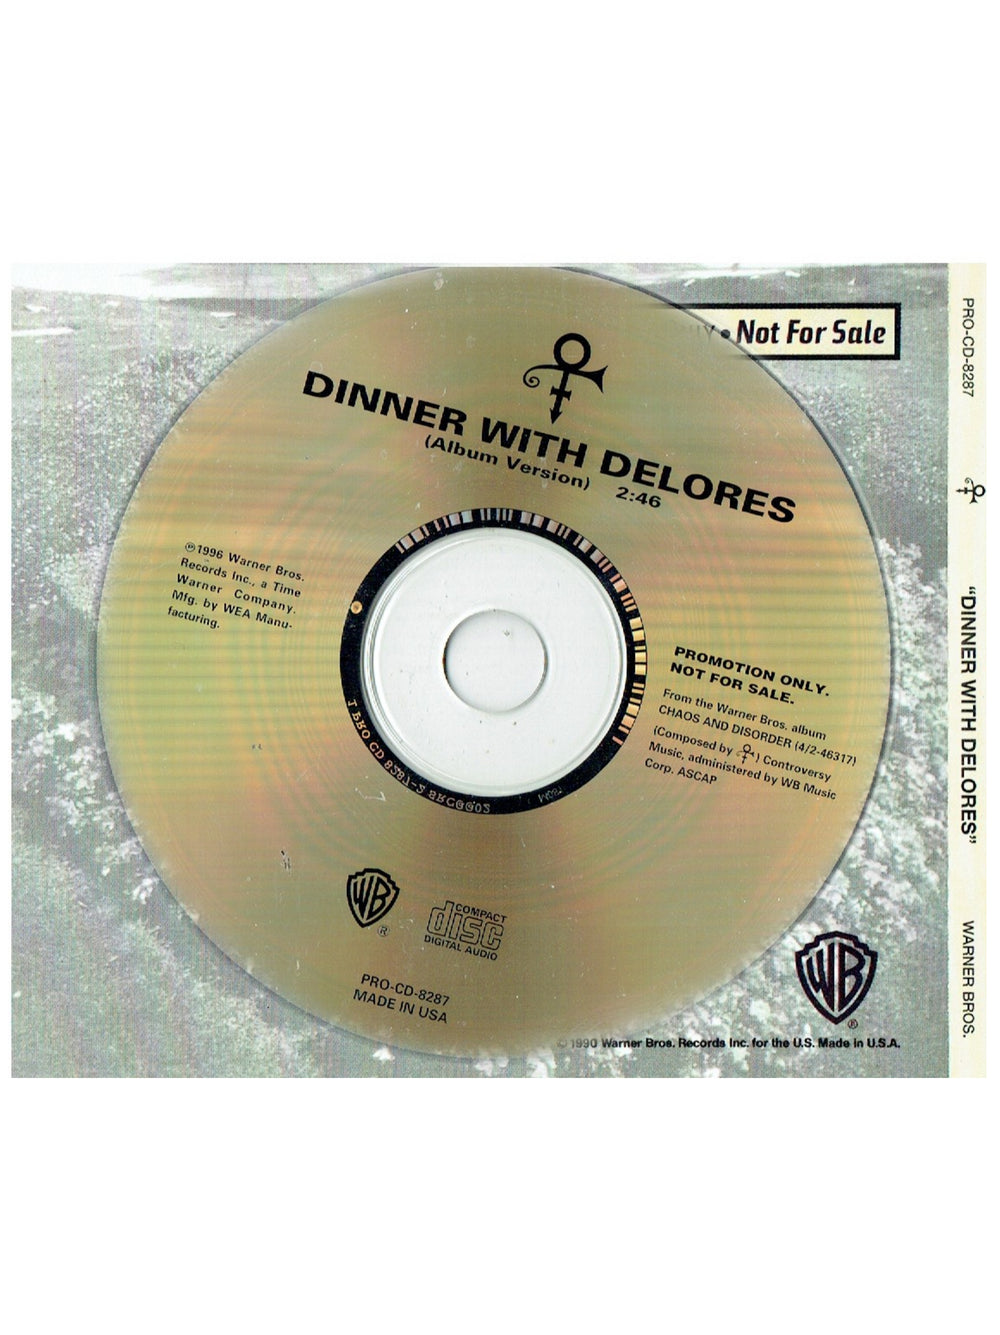 Prince – O(+> Dinner With Delores Promotional Only CD Single 1 Track USA Release 1996